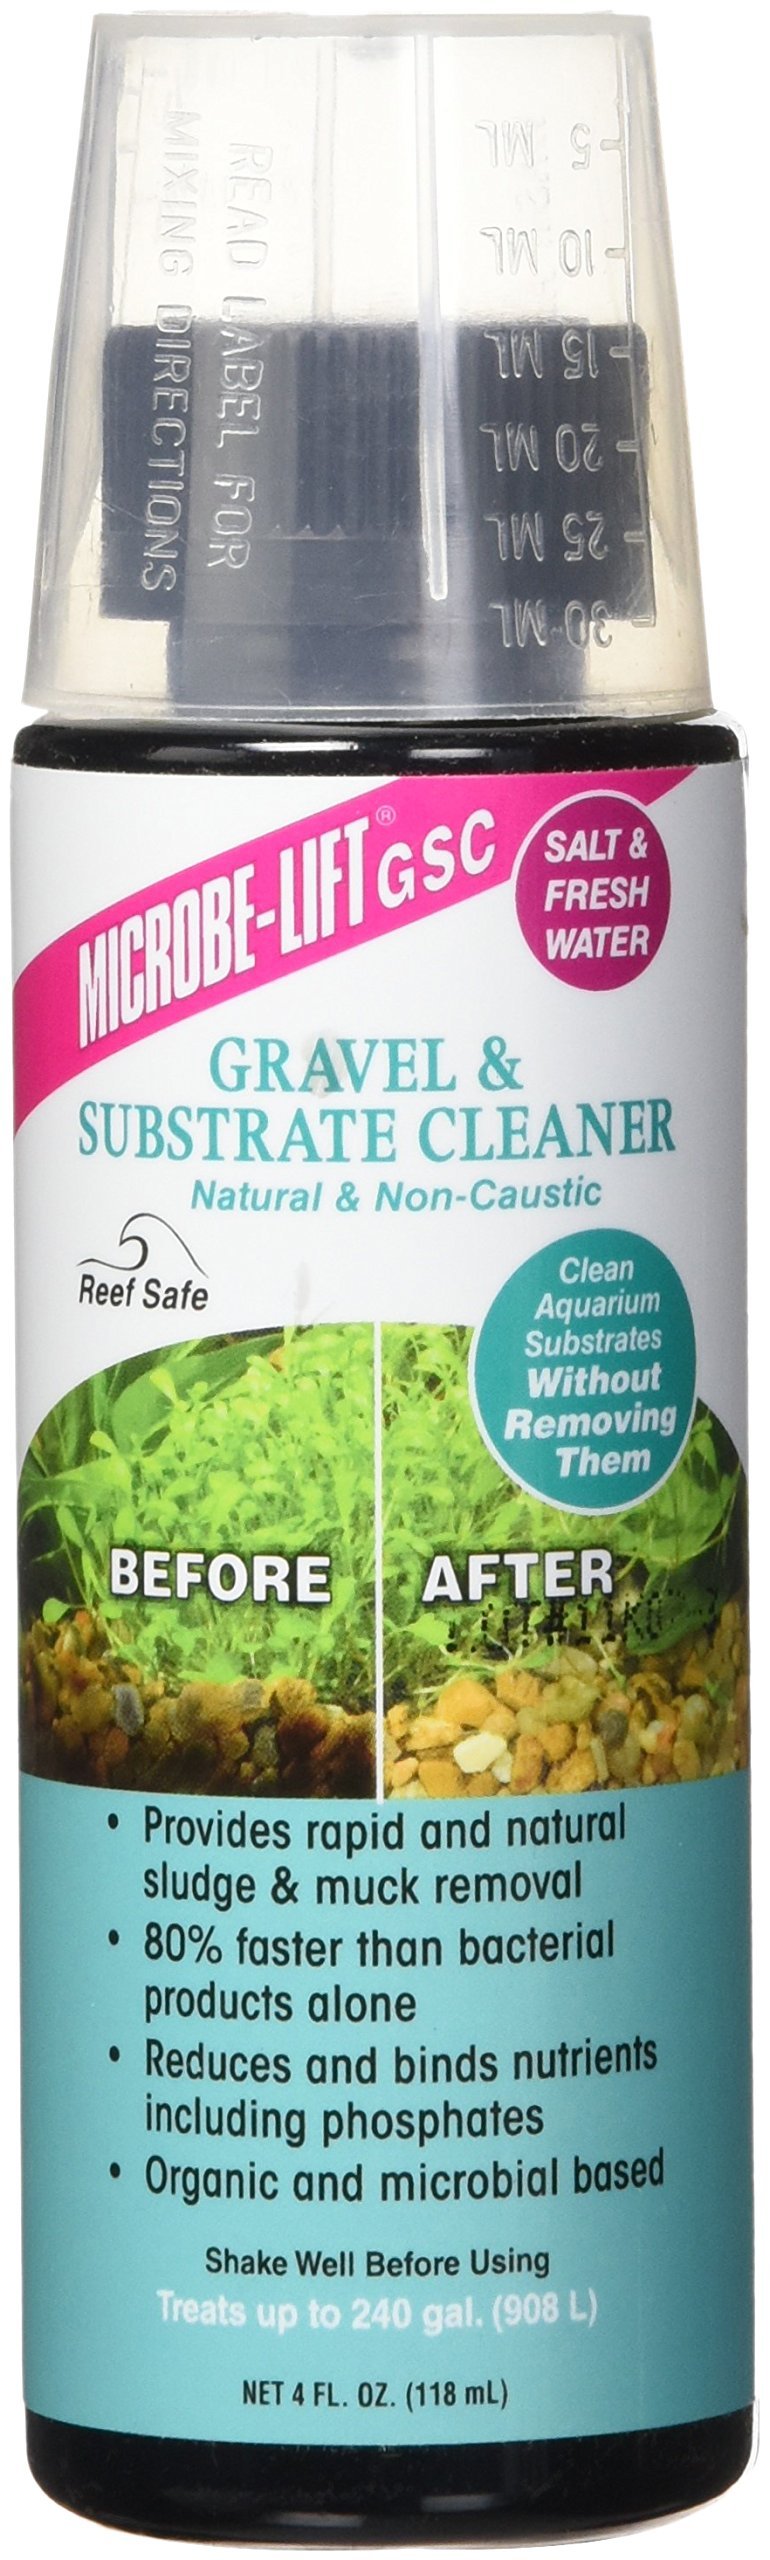 [Australia] - Ecological Labs AEL20528 Microbe Lift Gravel and Substrate Cleaner for Aquarium, 4-Ounce 